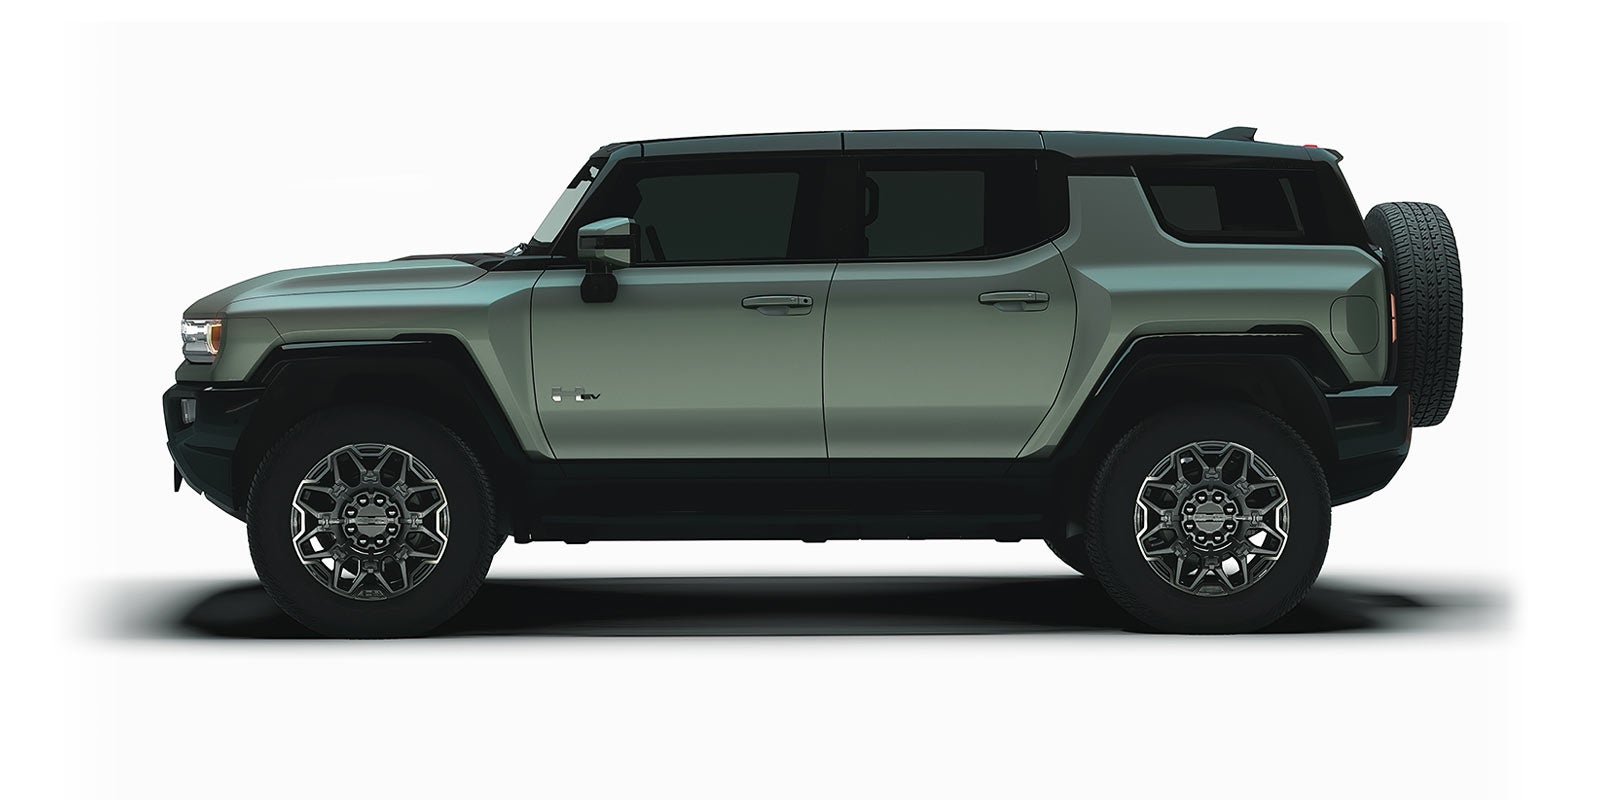 hummer ev pickup and hummer ev | Sisbarro Buick GMC in LAS CRUCES NM